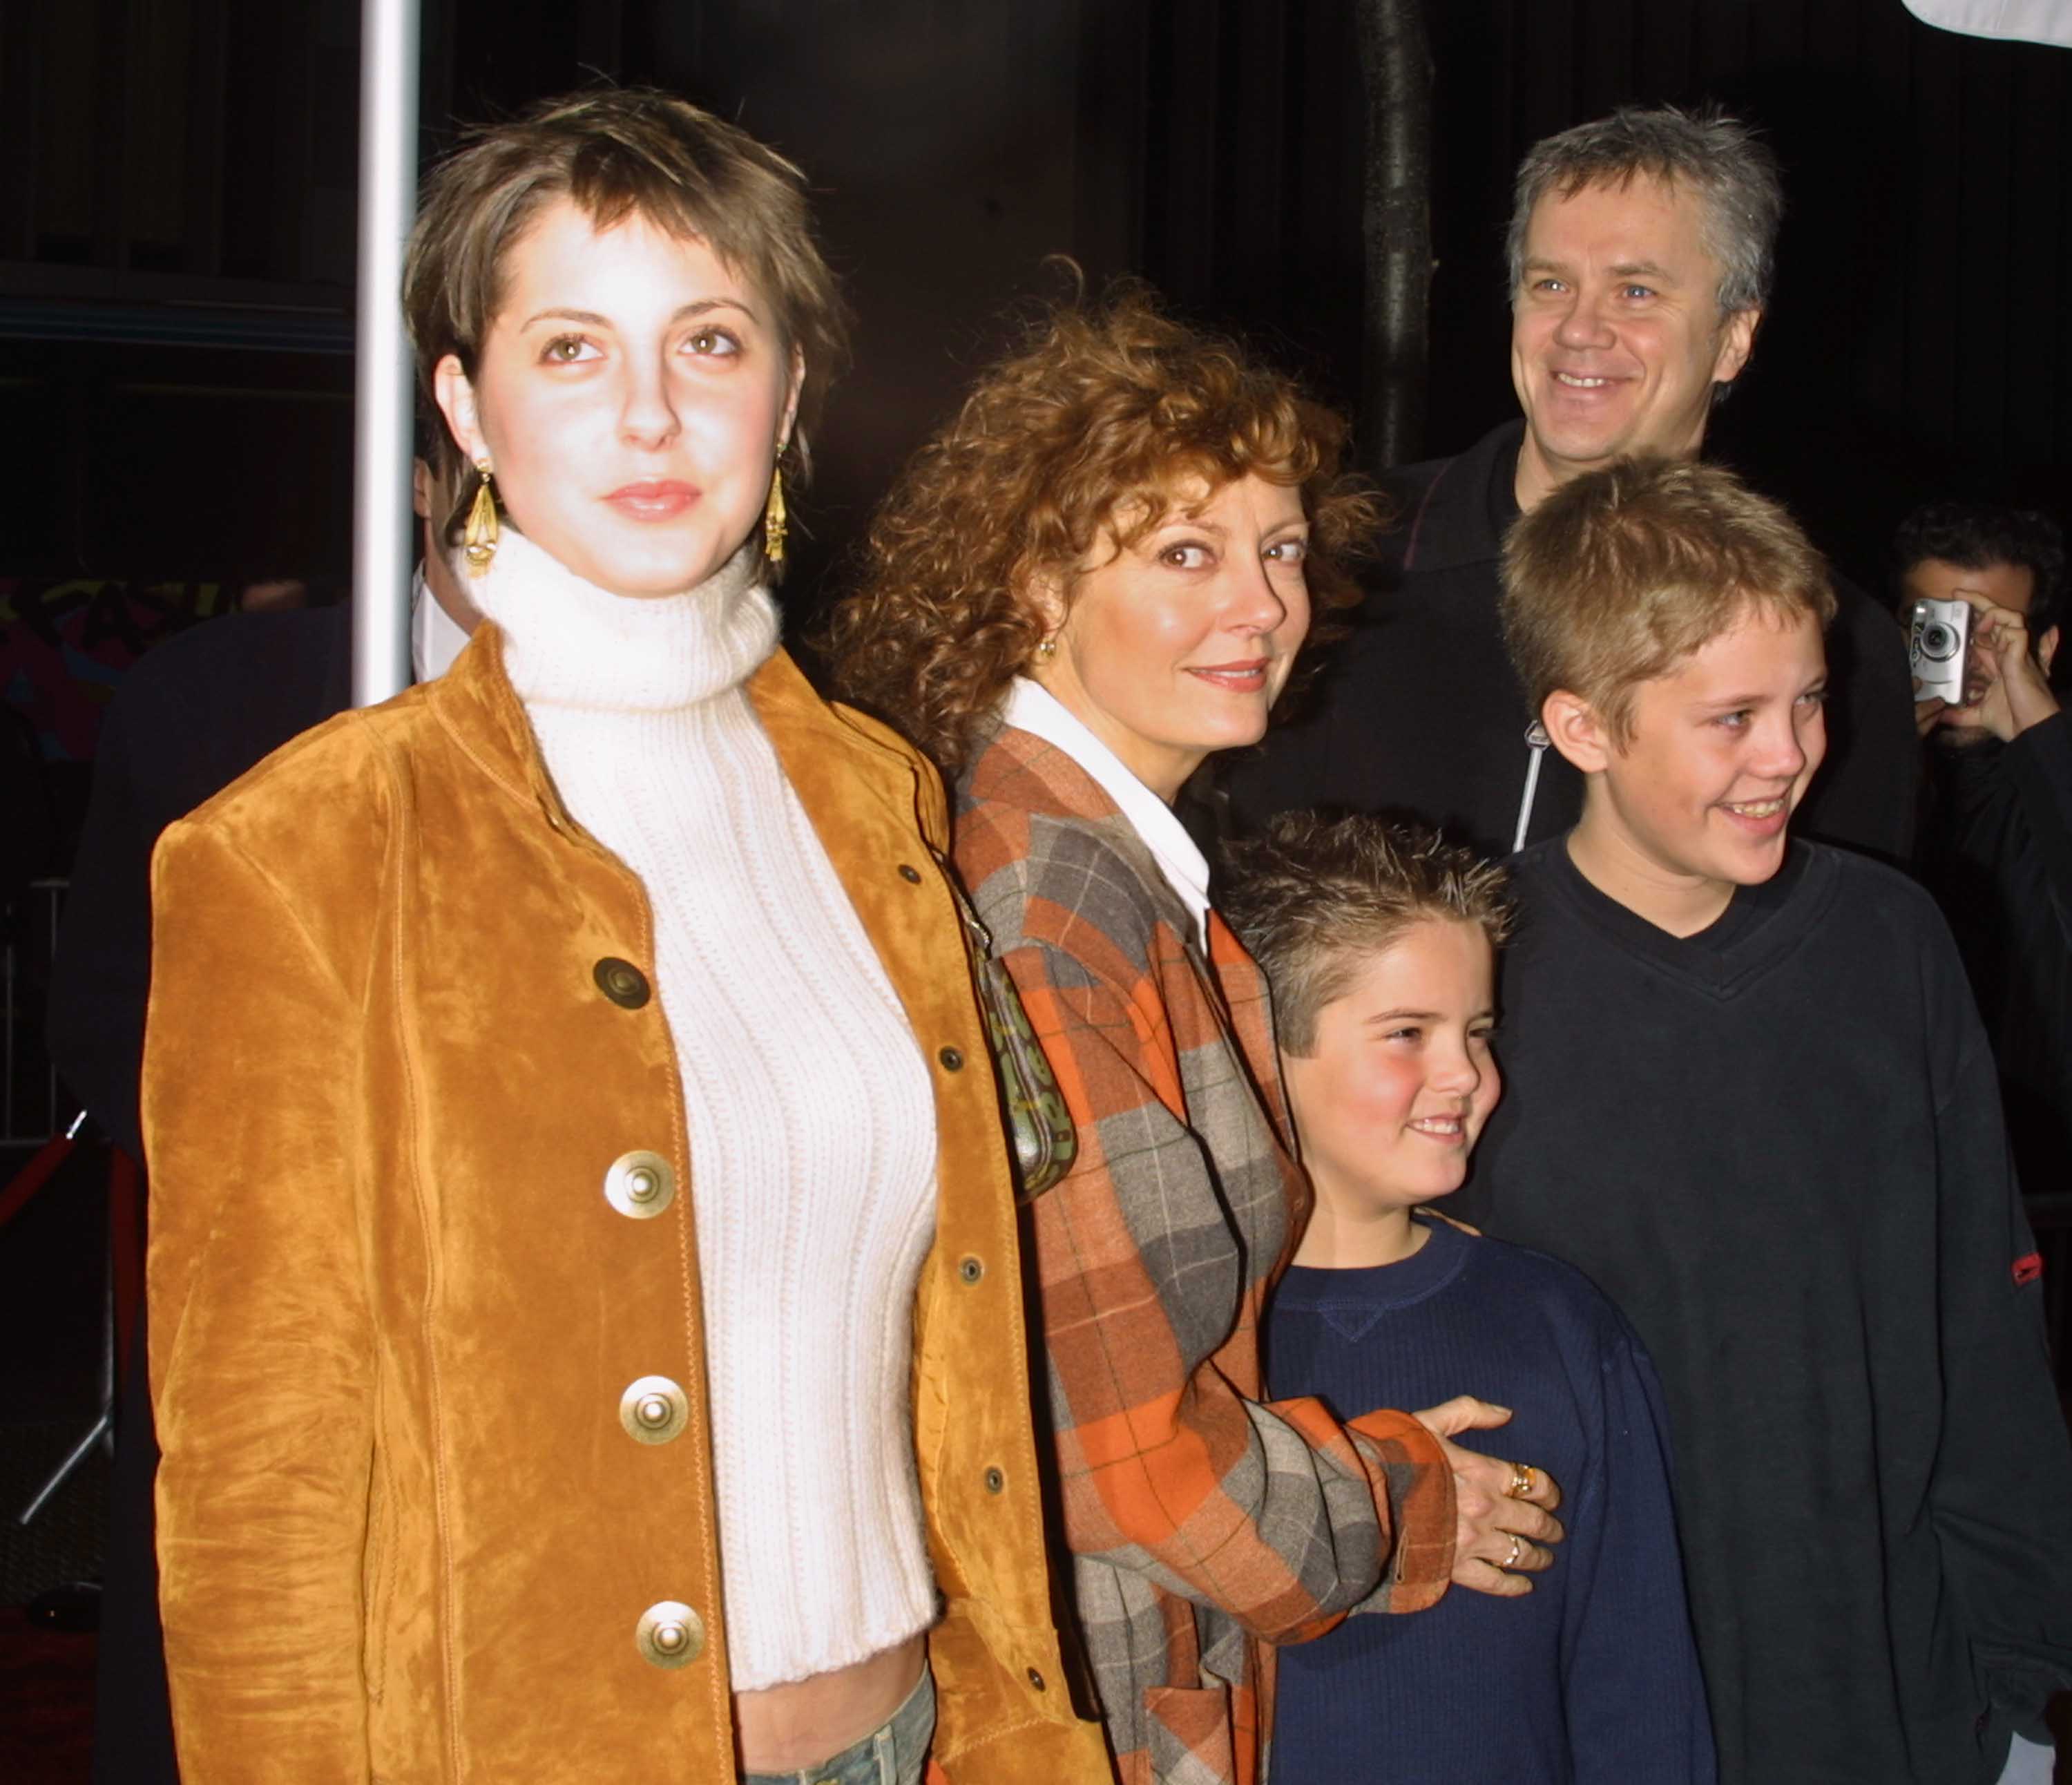 Susan Sarandon and Tim Robbins with their children at the premiere of "The Lord Of The Rings - The Fellowship Of The Ring" on December 13, 2001, in New York City. | Source: Getty Images